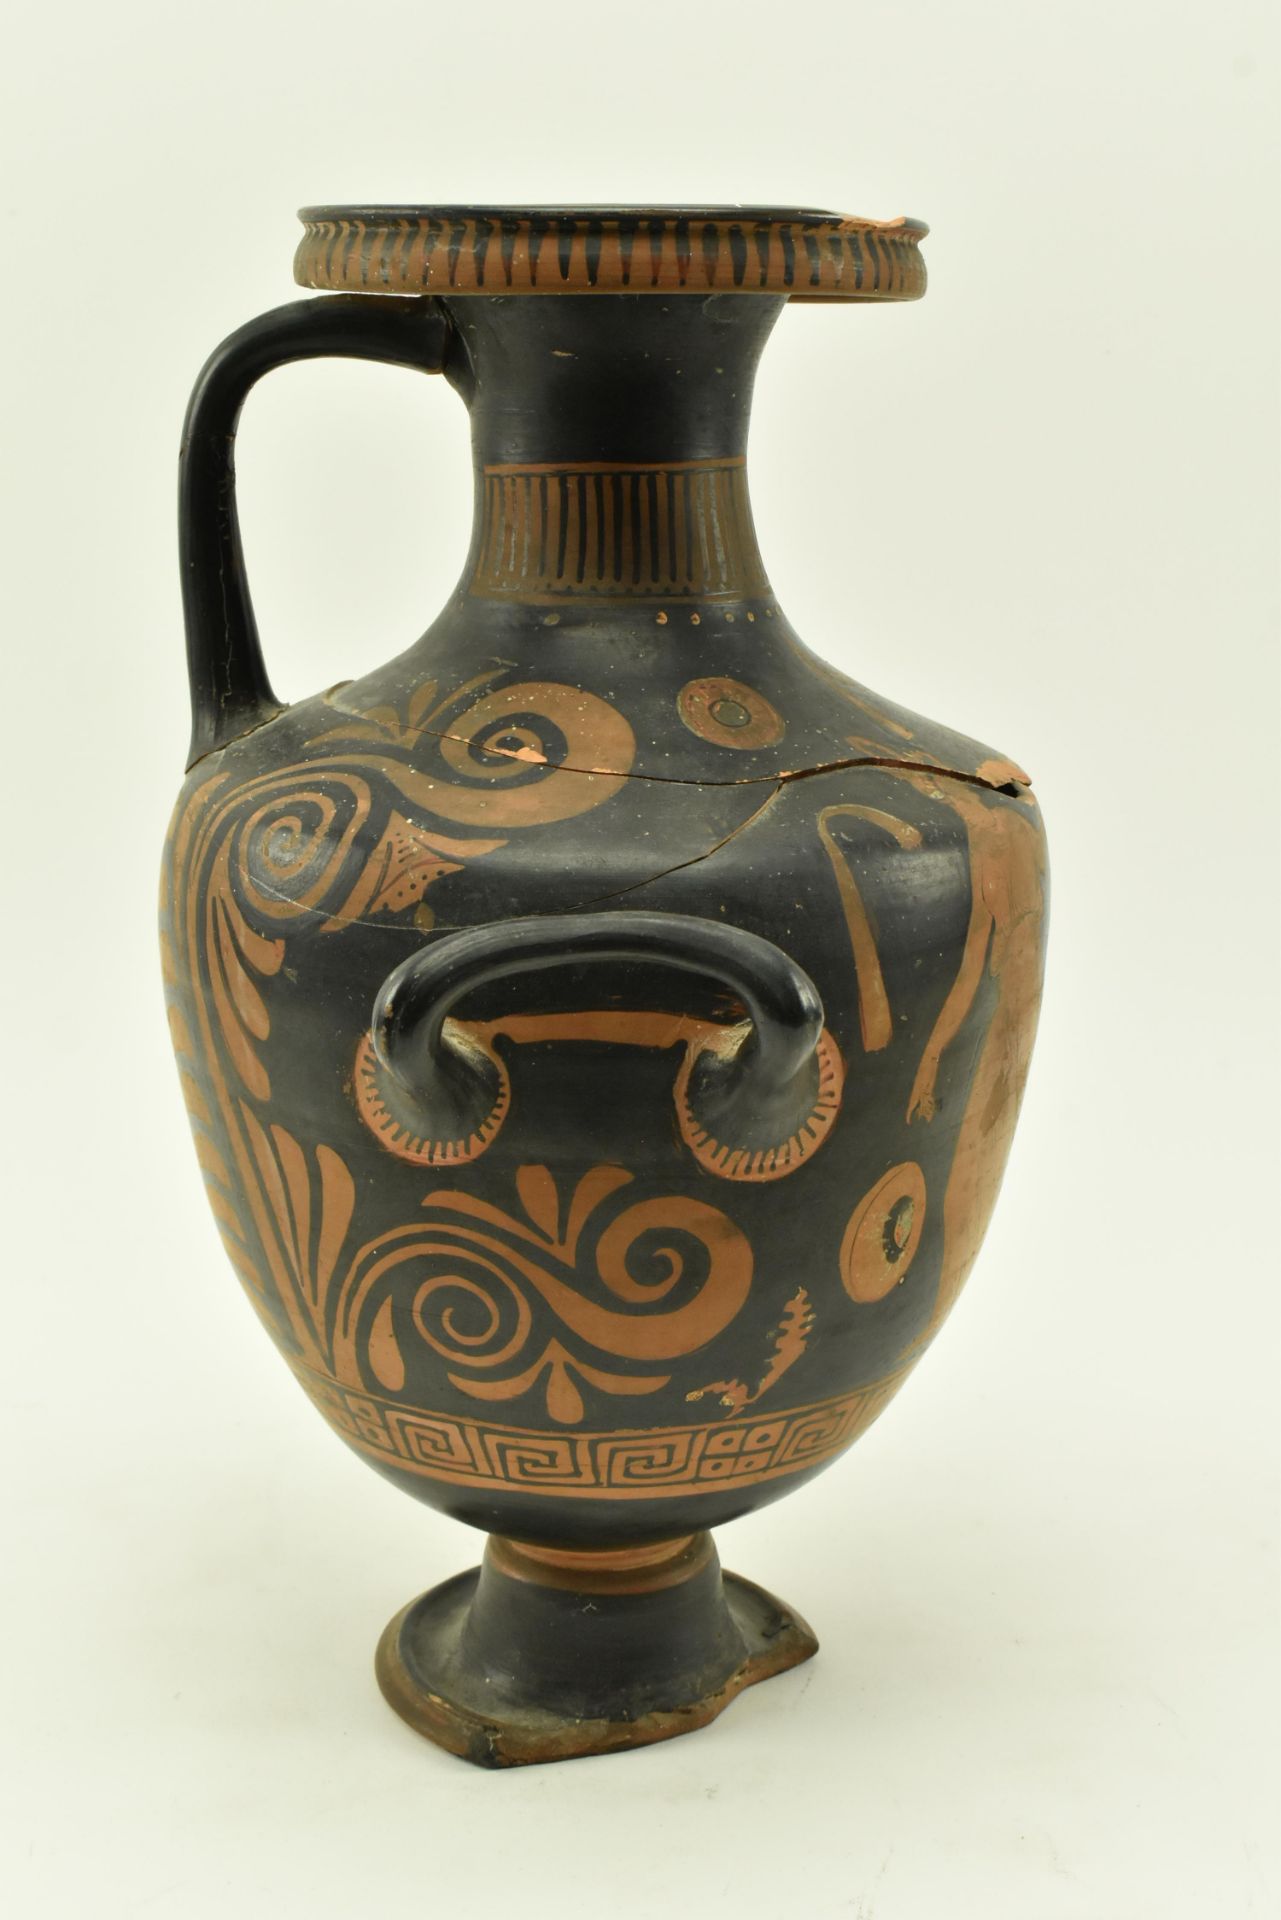 AFTER APULIAN (GREEK) - HAND PAINTED TERRACOTTA HYDRIA VASE - Image 6 of 9